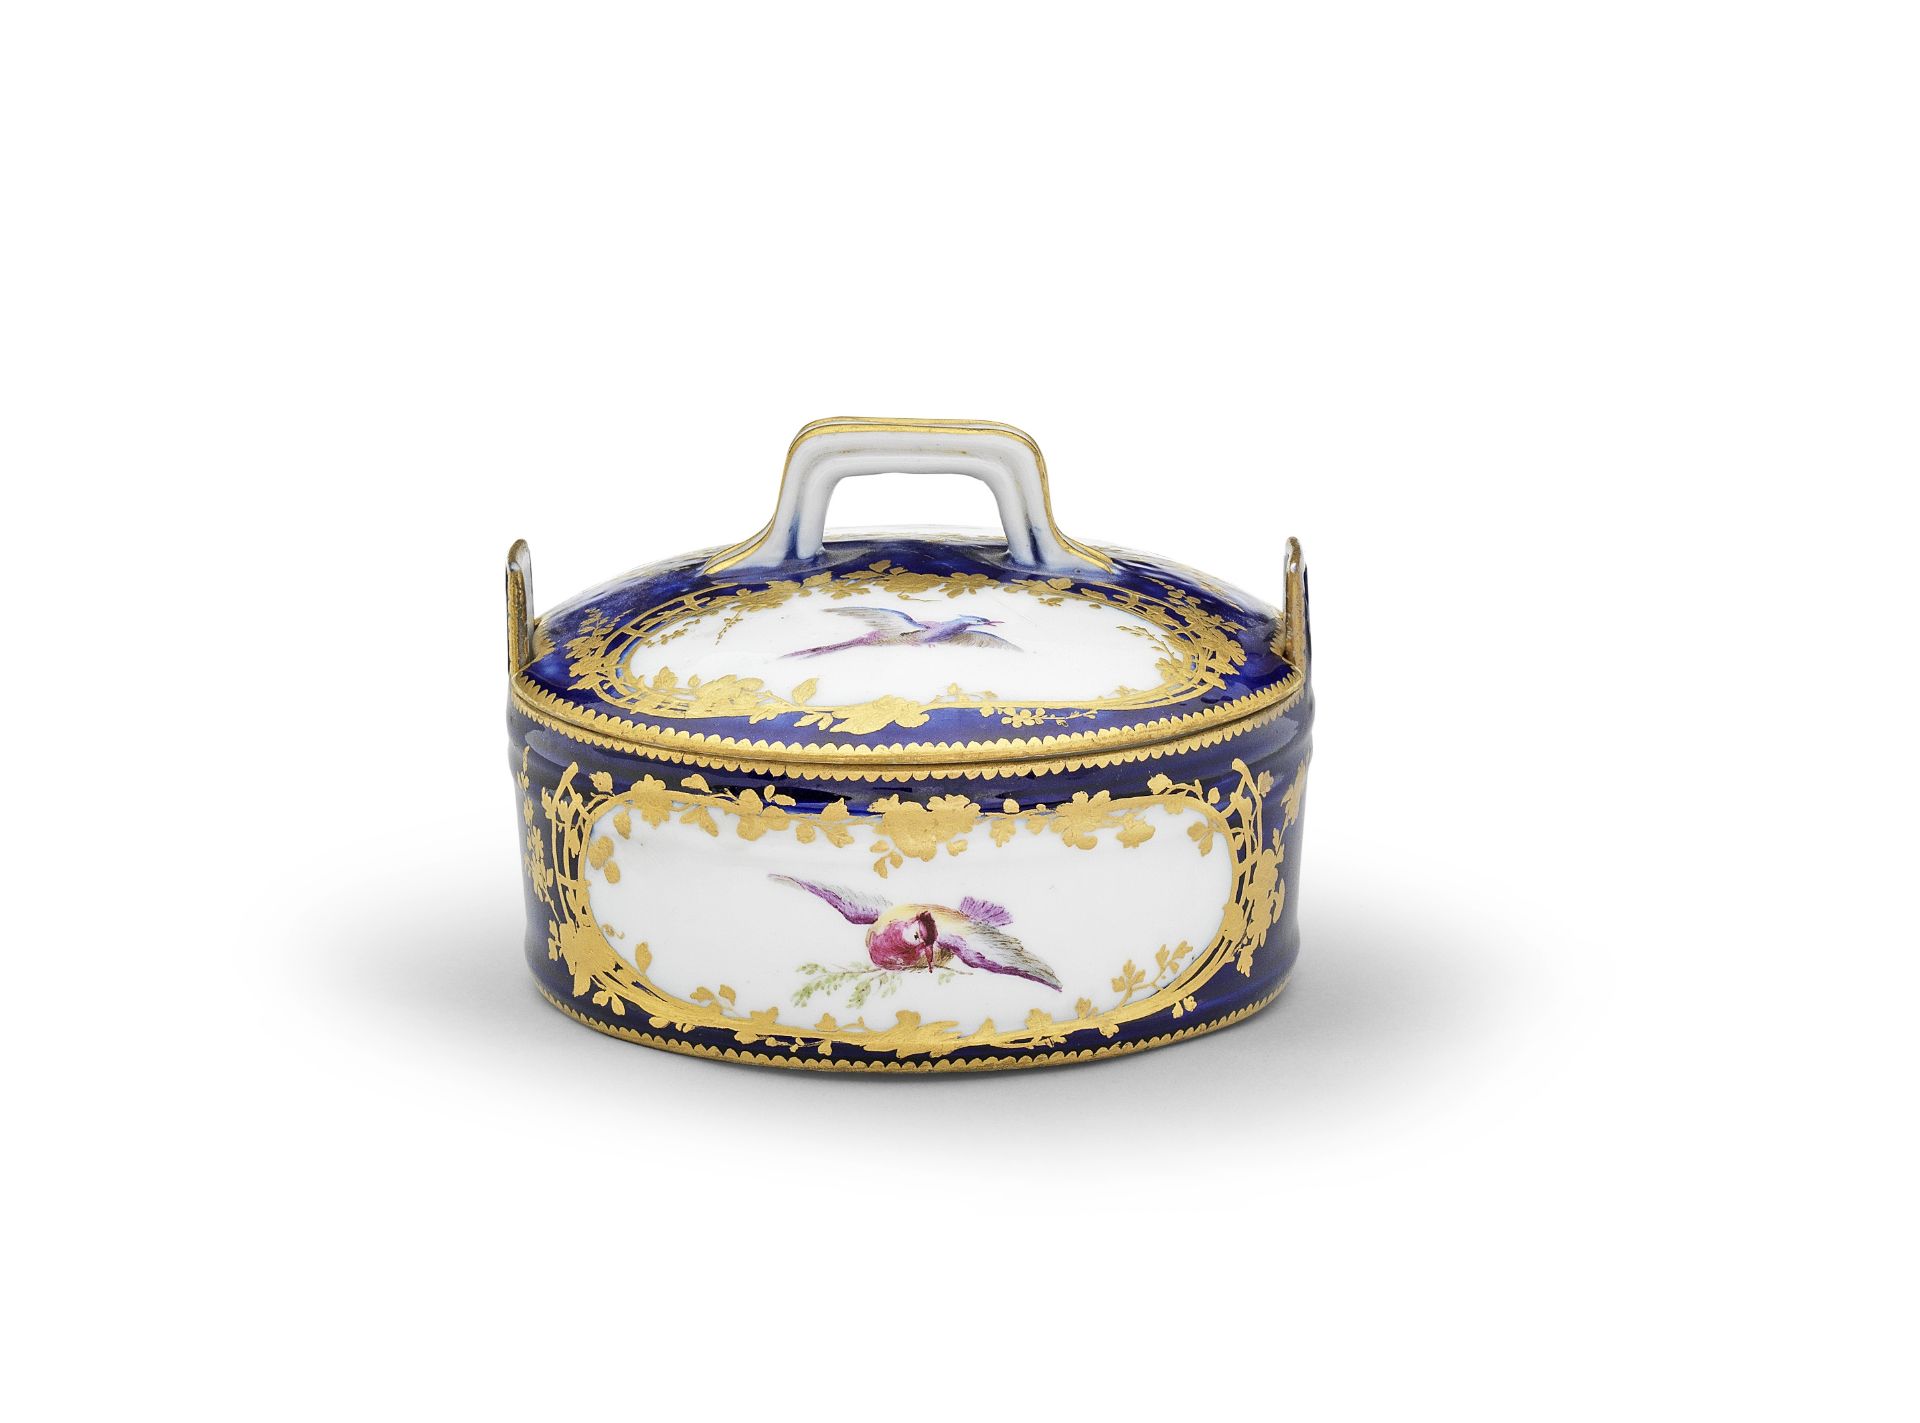 A Vincennes bleu lapis-ground butter tub and cover, circa 1755